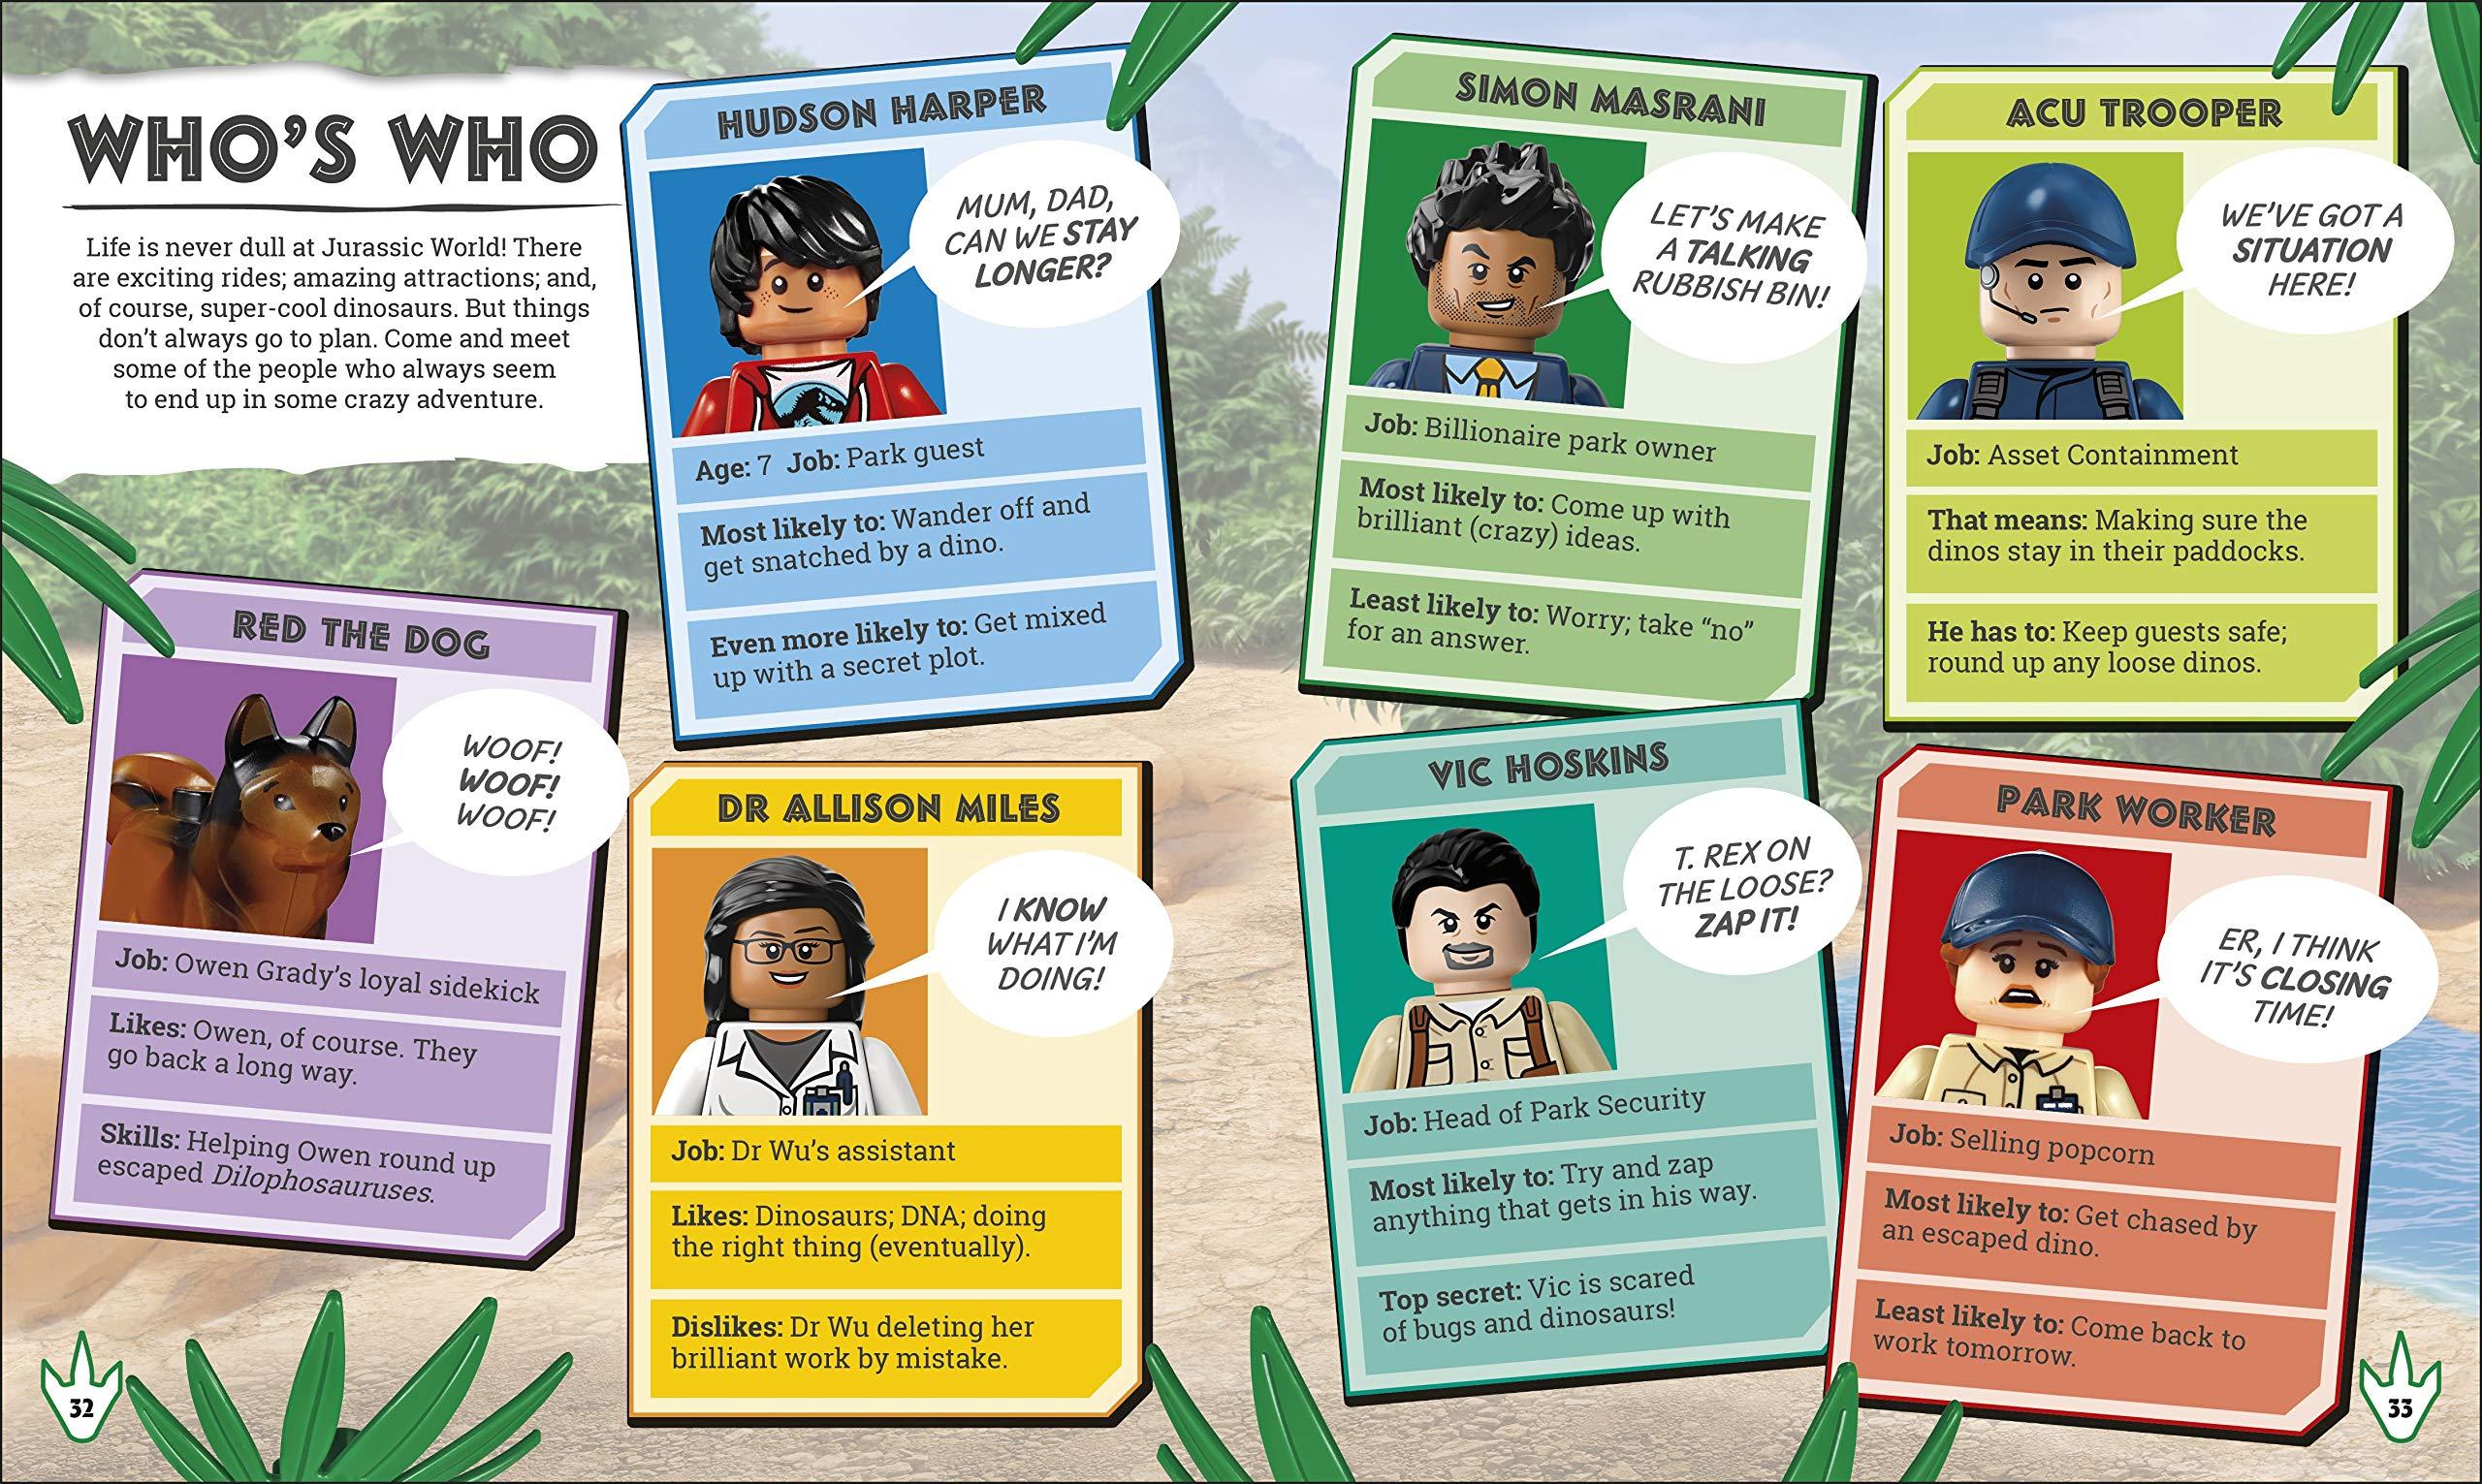 LEGO Jurassic World The Dino Files: With LEGO Jurassic World Claire Minifigure And Baby Raptor!